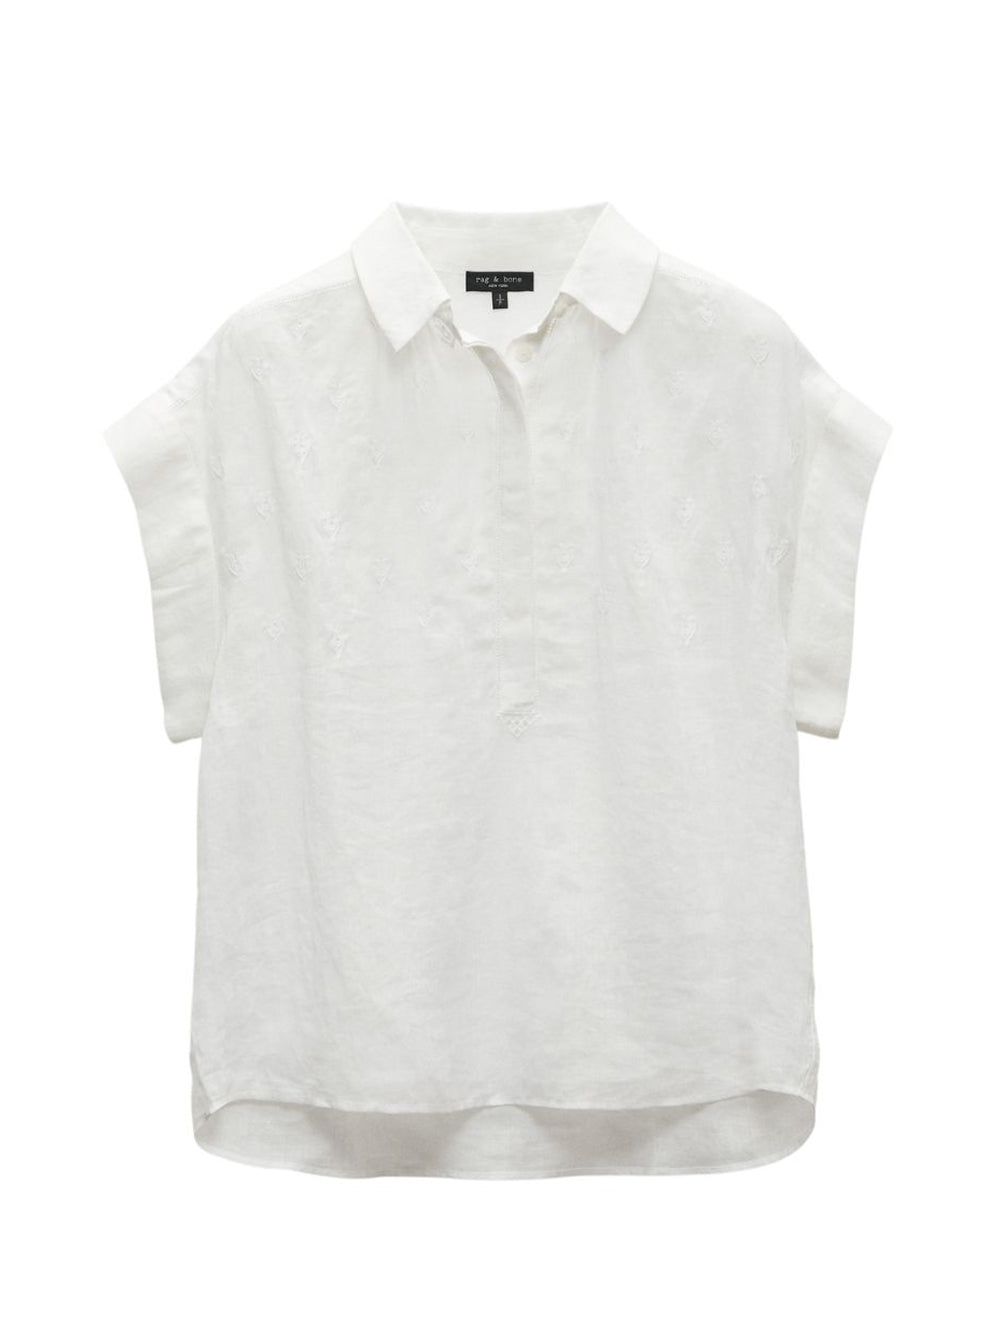 Robin Embroidered Top (White)